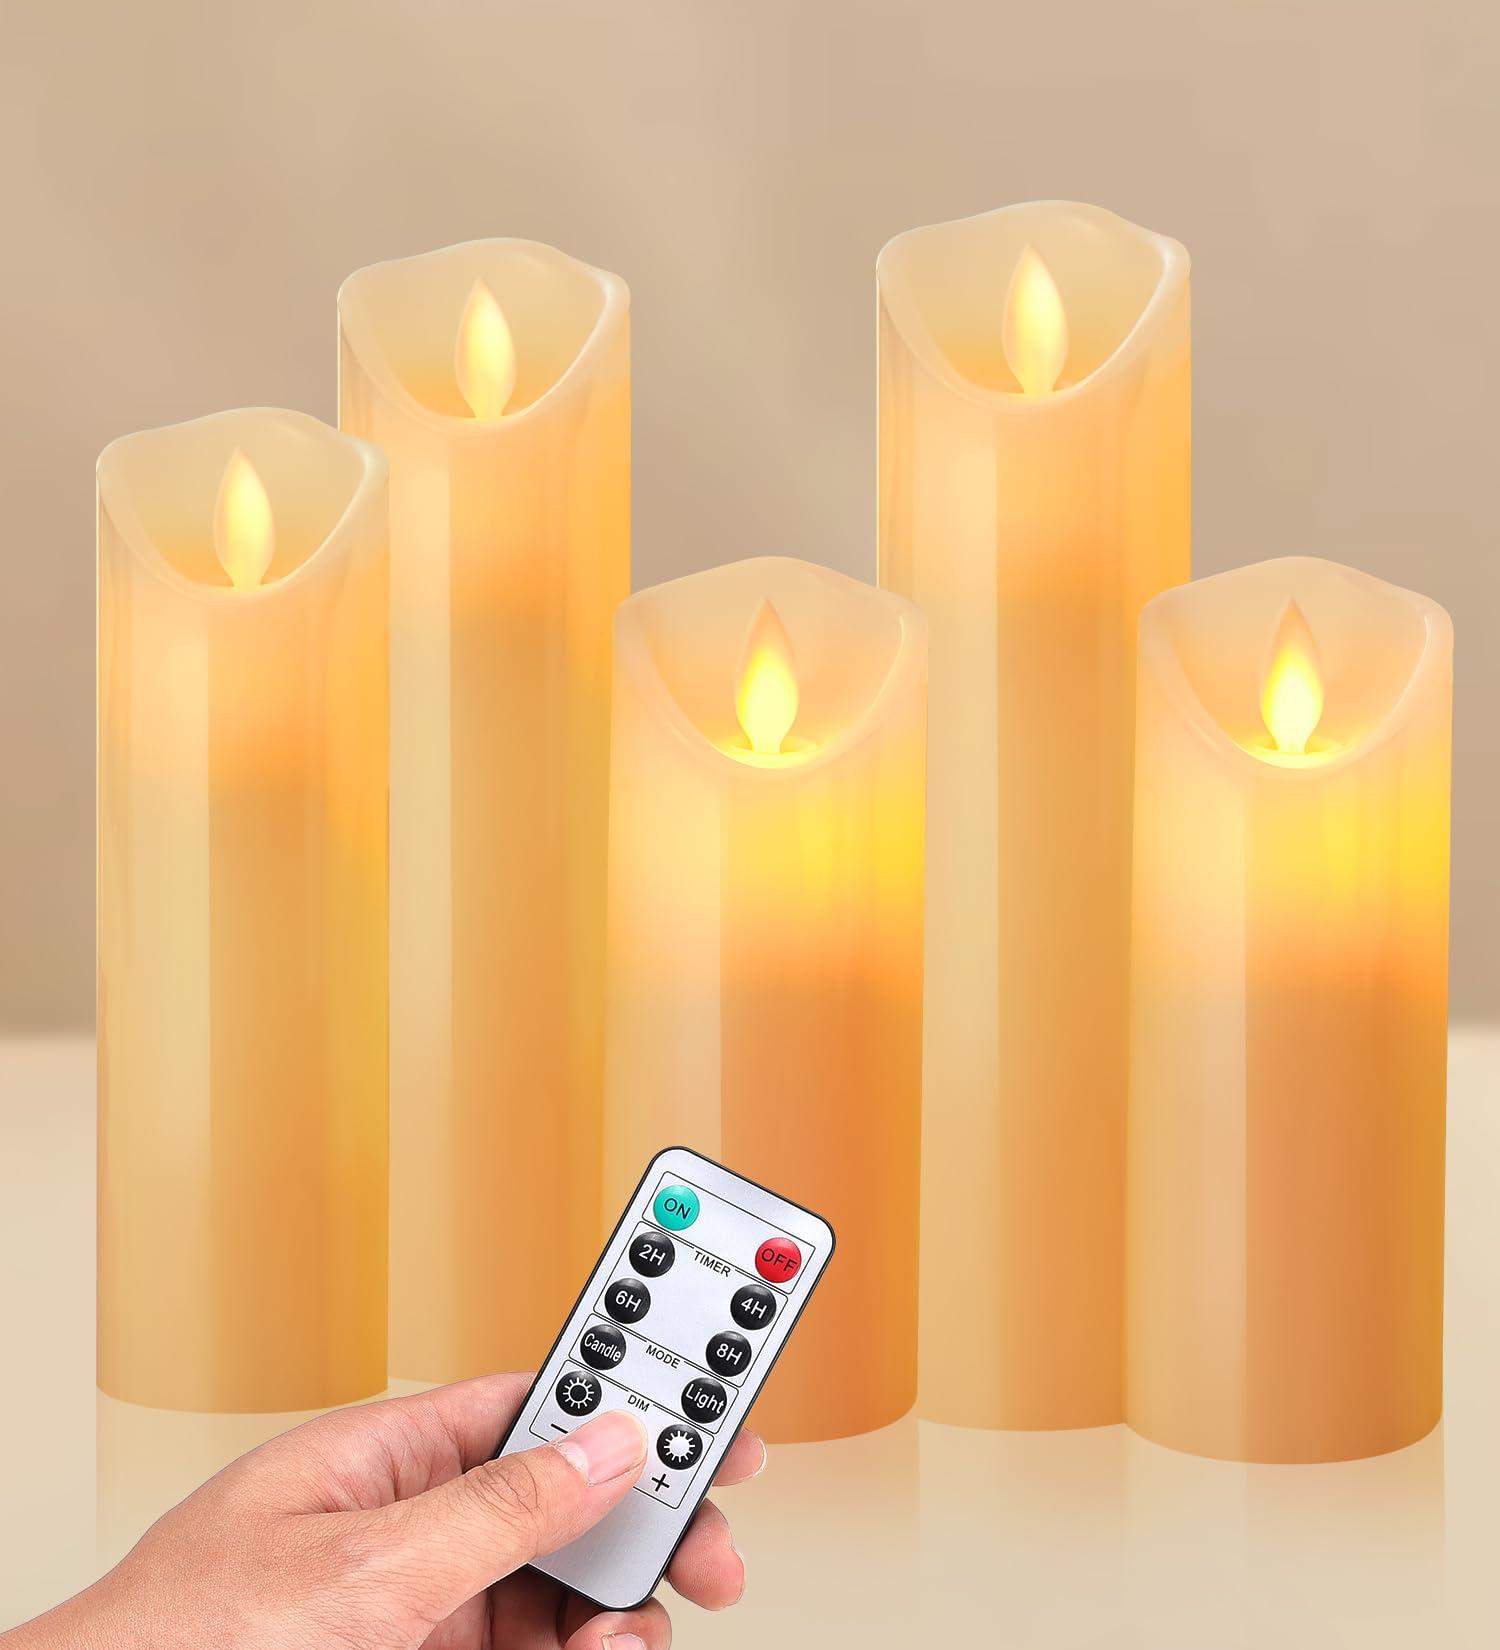 XEMQENER LED Candles, 5PCS Ivory Flameless Candles with Real Wax Candle Pillars, Battery Candles Flickering with Remote Timer Dimmer, Realistic Dancing Flame Fake Candles for Wedding Festival Decor